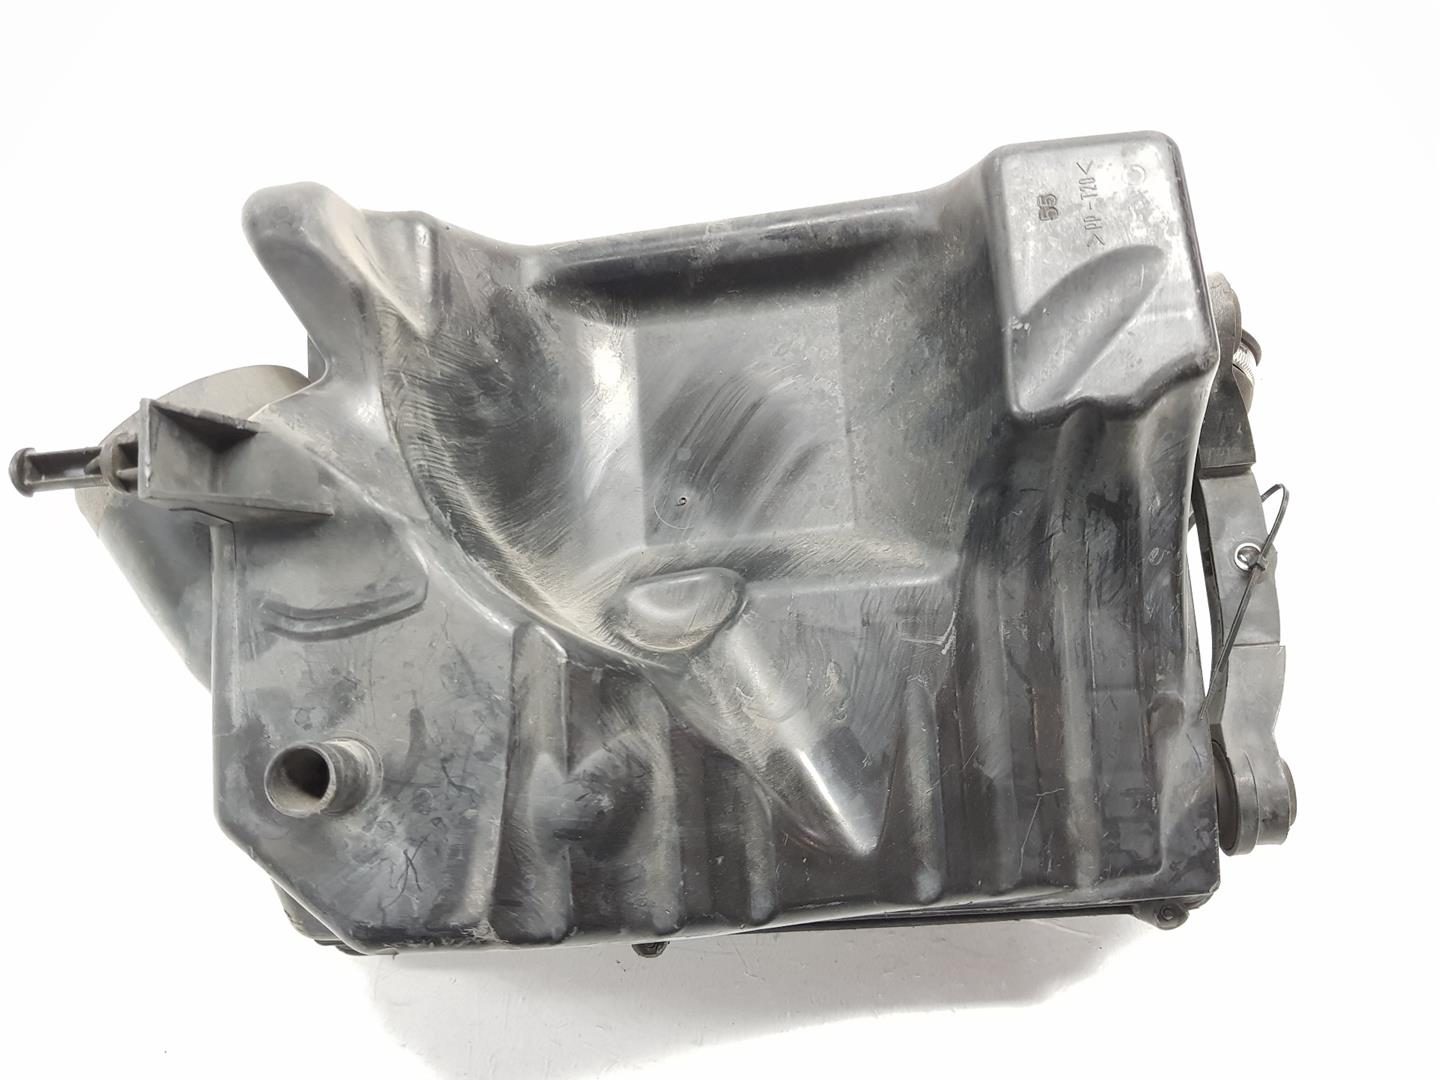 OPEL Astra J (2009-2020) Other Engine Compartment Parts 4614485911, 55556463 23834690